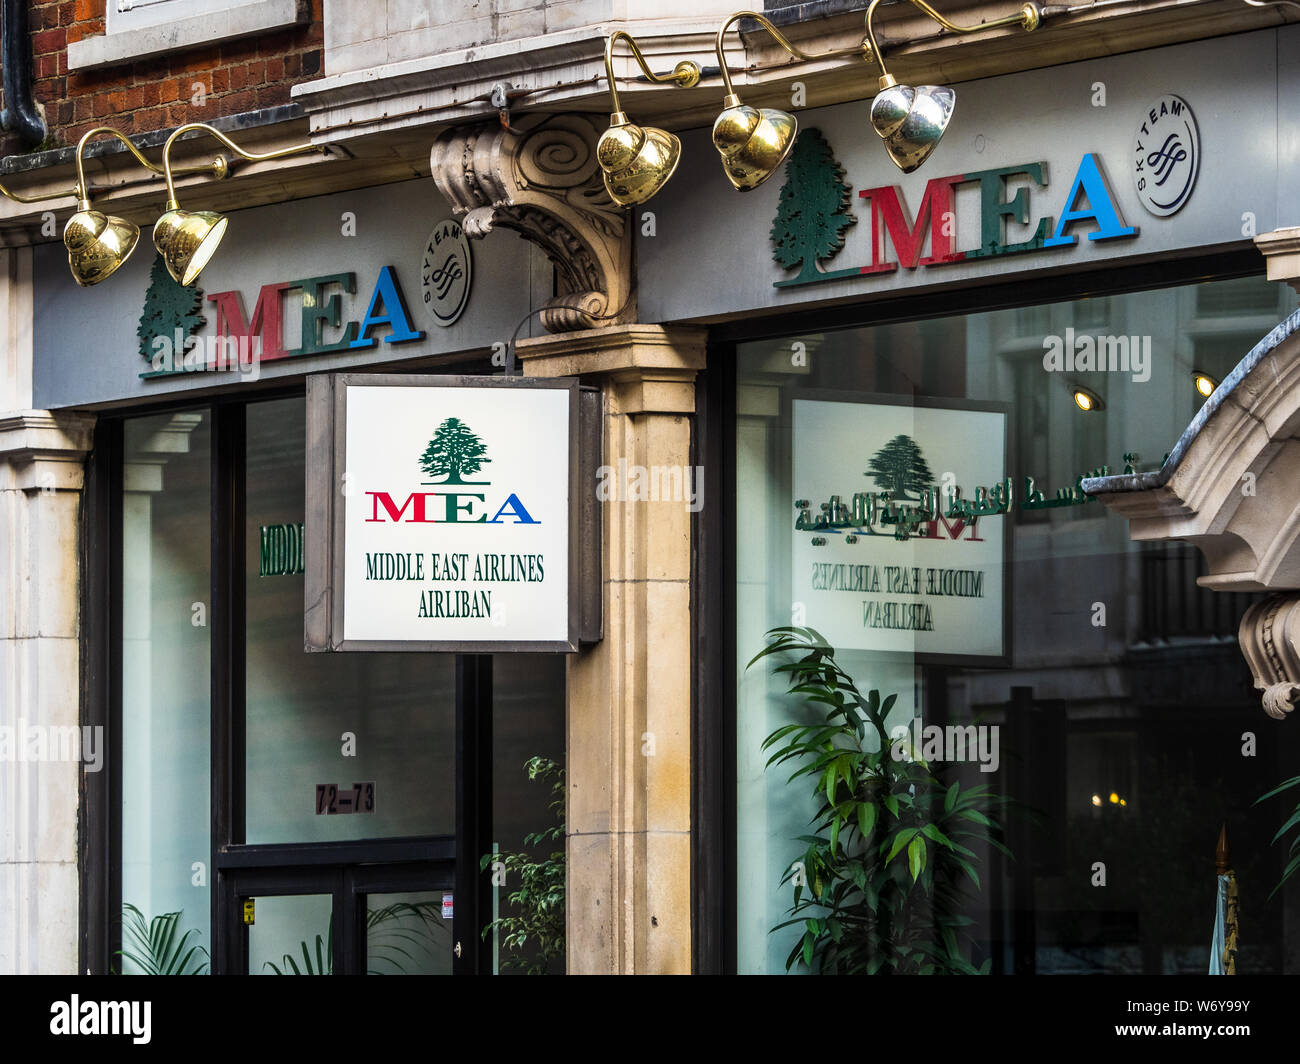 MEA Airline Offices in Central London UK. Middle East Airlines Offices. Stock Photo